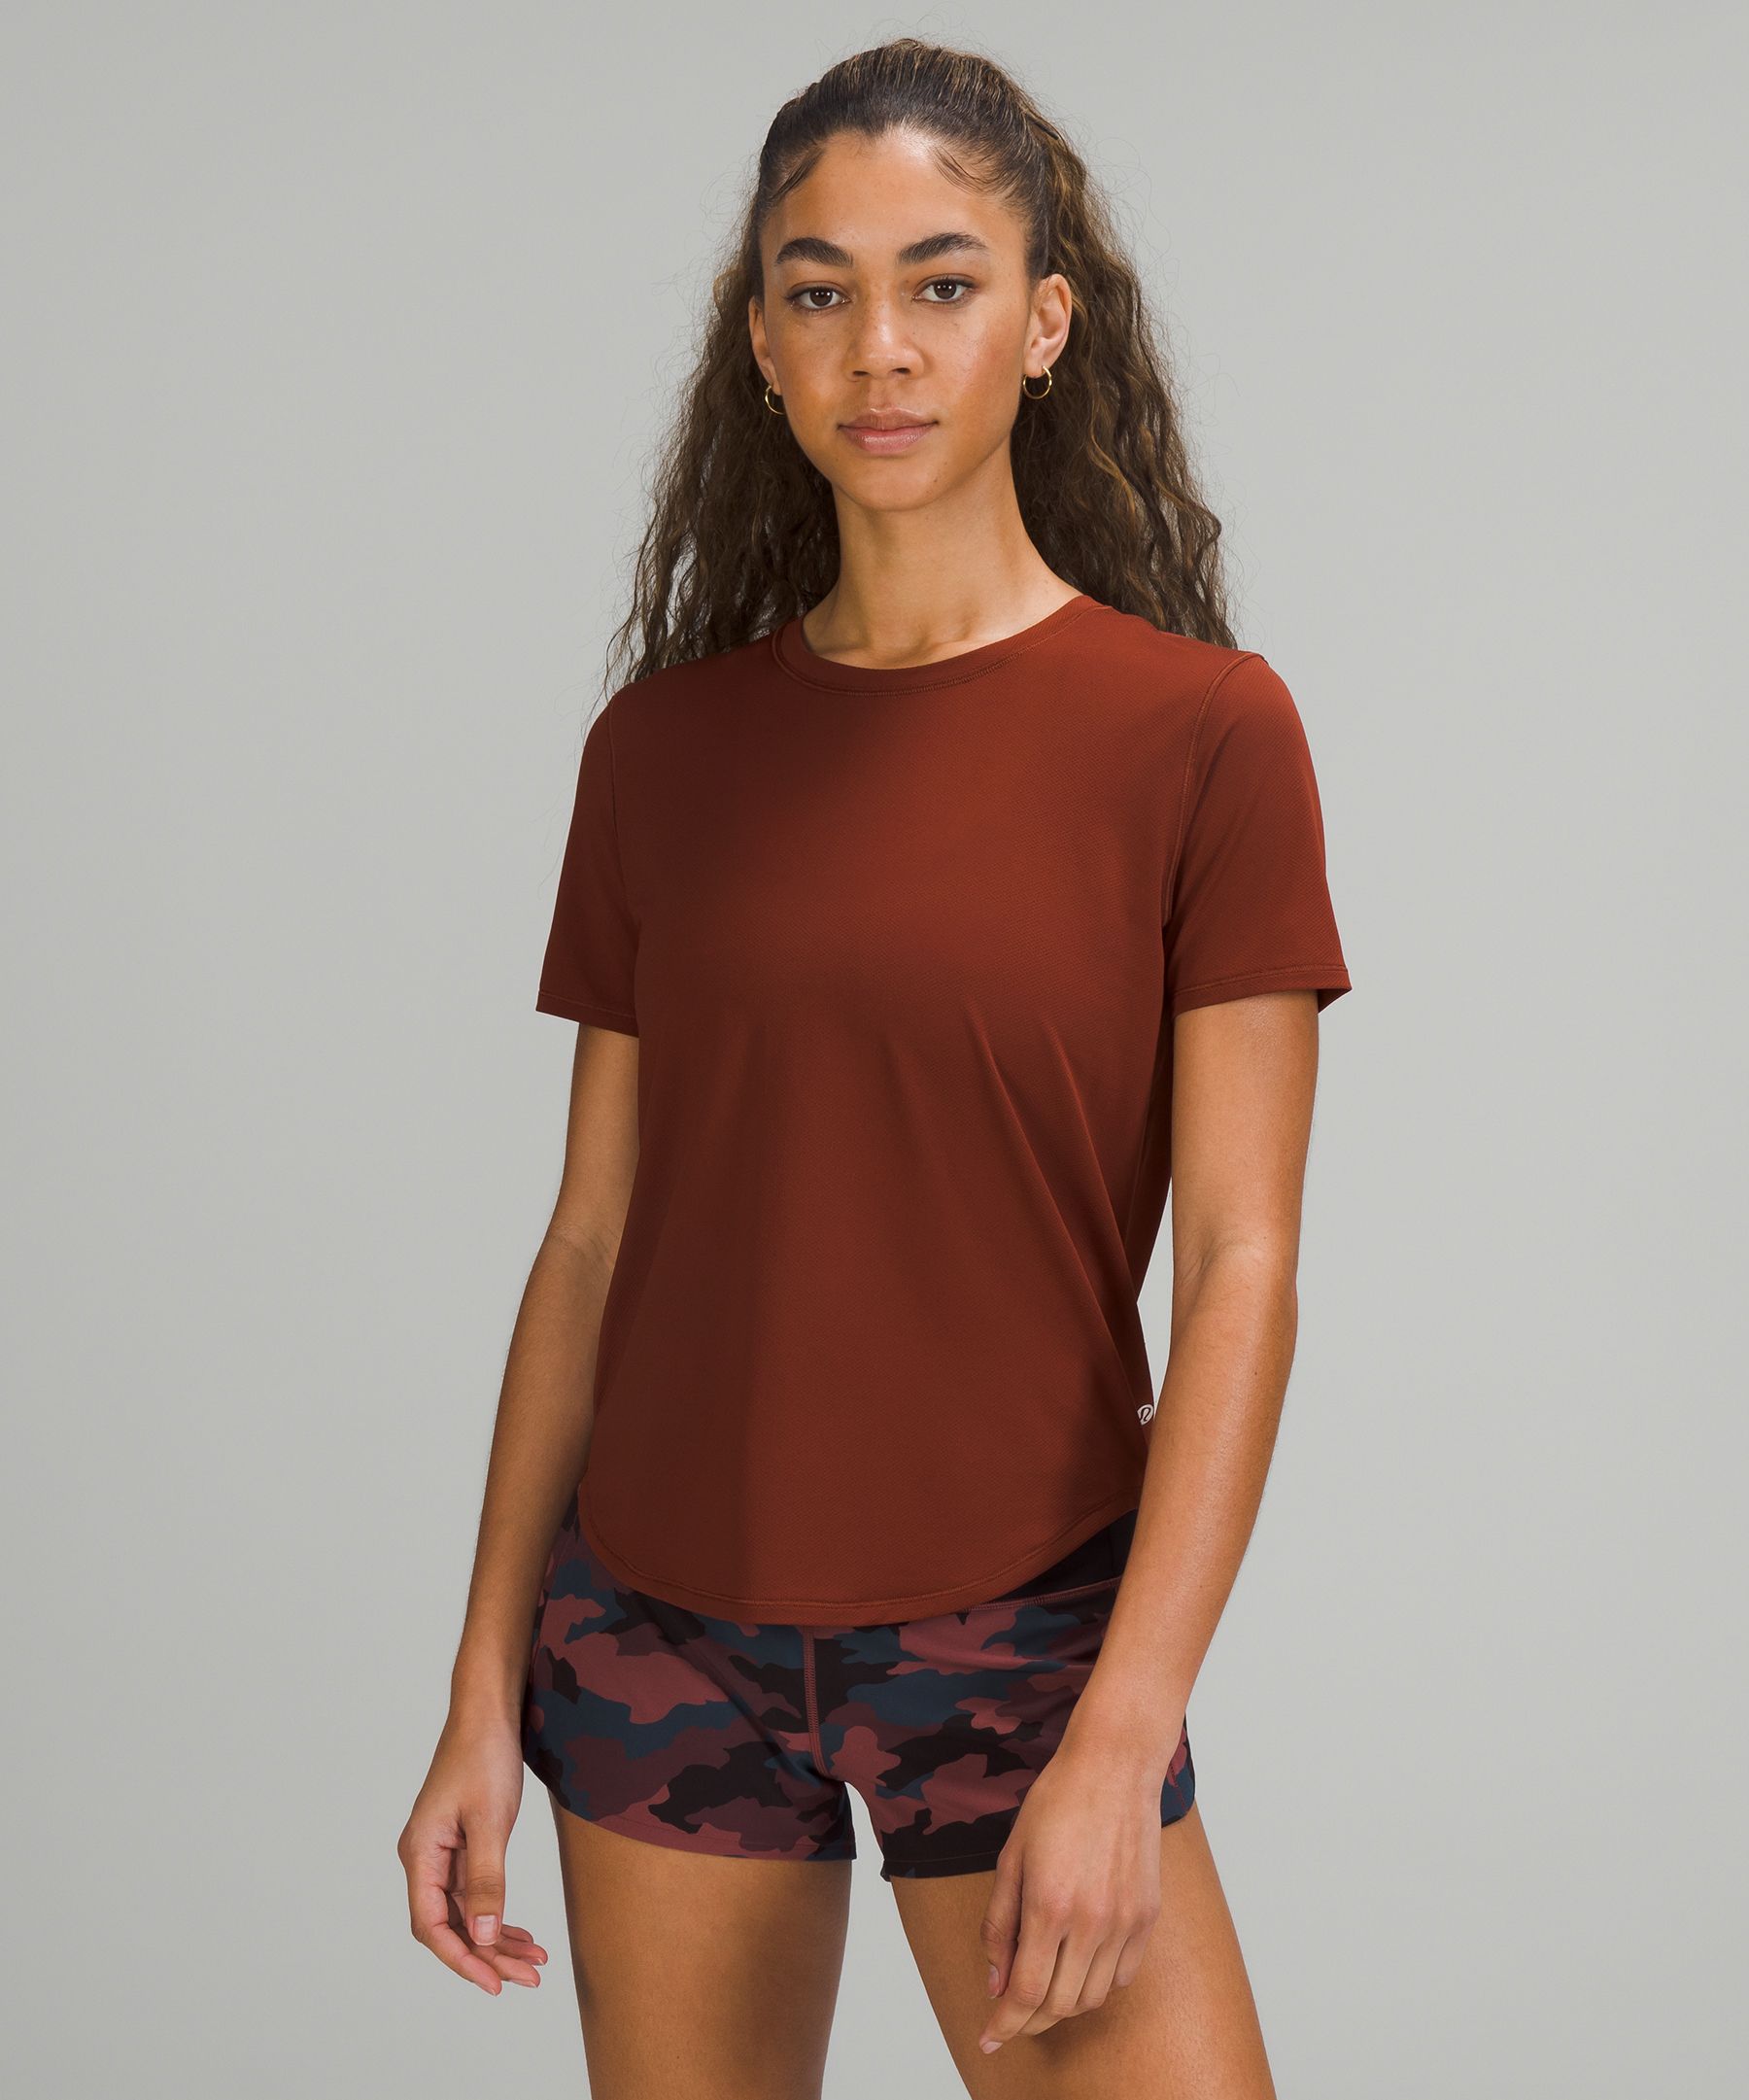 Lululemon High-neck Running And Training T-shirt In Brown